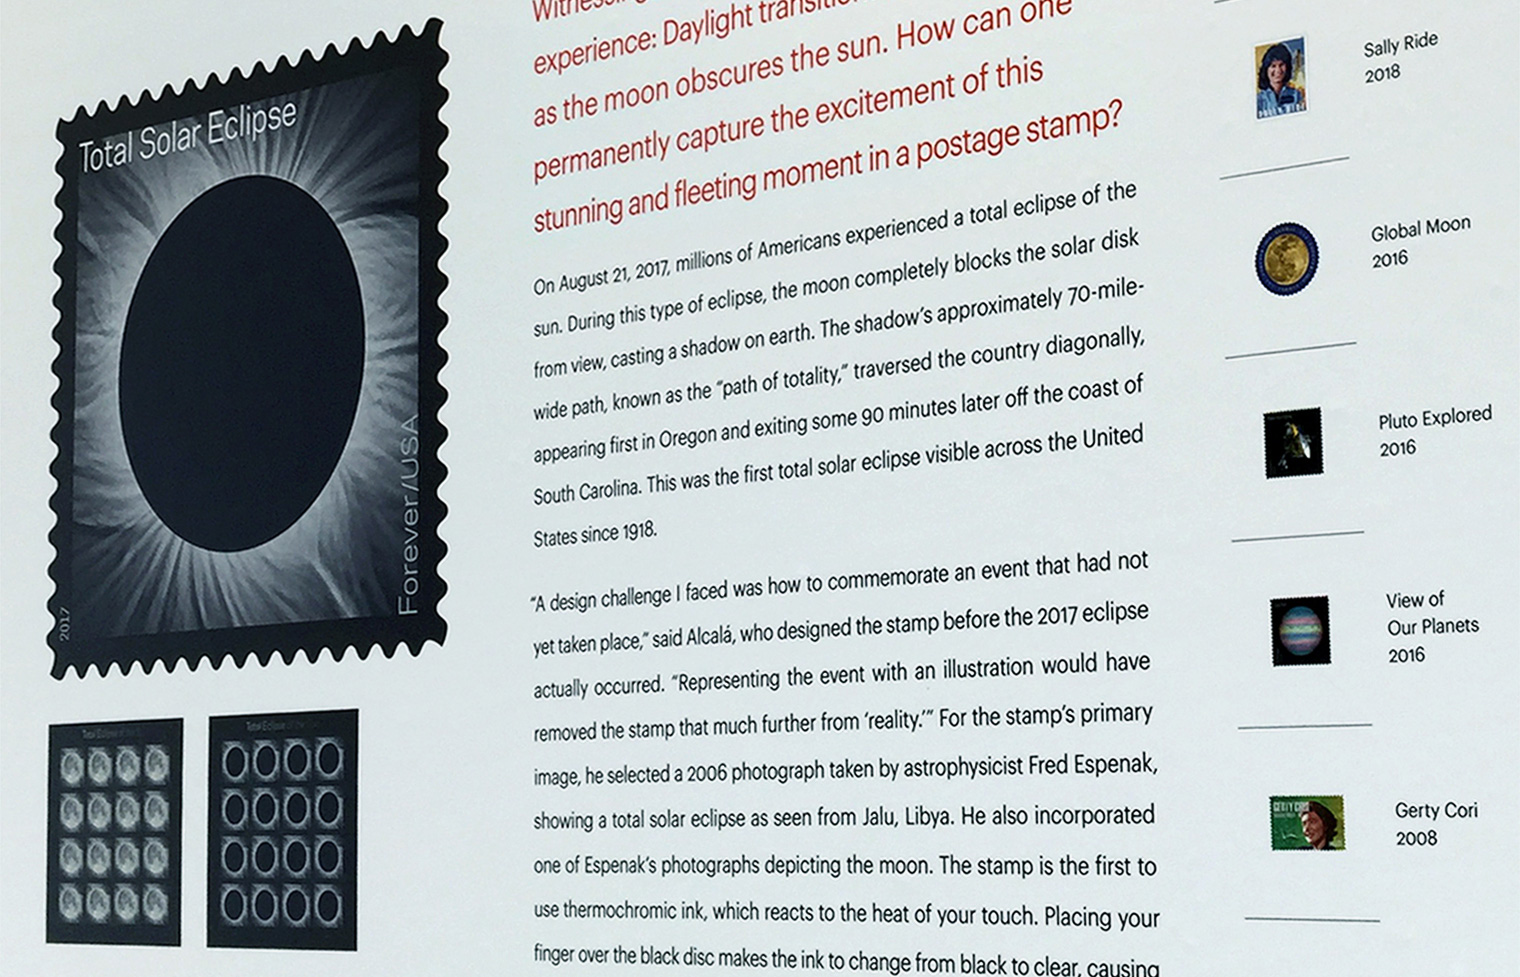 Detail of an interpretive panel outlines the challenges developing the Total Solar Eclipse stamp.